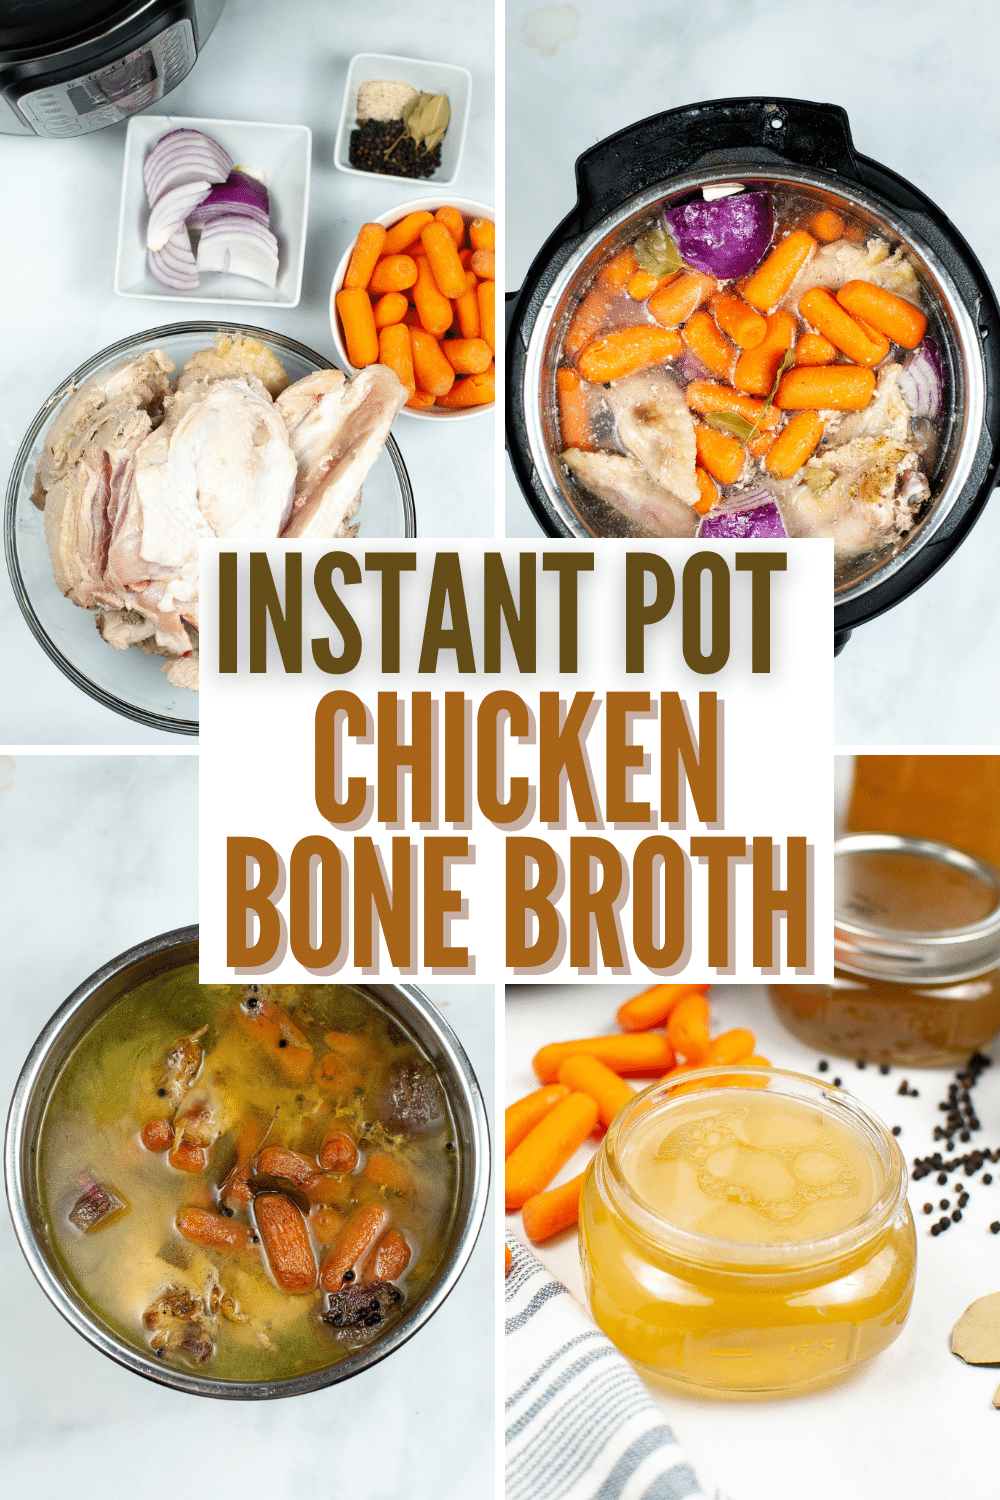 Instant Pot Chicken Bone Broth is the perfect way to get the benefits of bone broth without having to spend hours simmering on the stovetop. #instantpot #pressurecooker #chickenbonebroth #bonebroth #recipe via @wondermomwannab